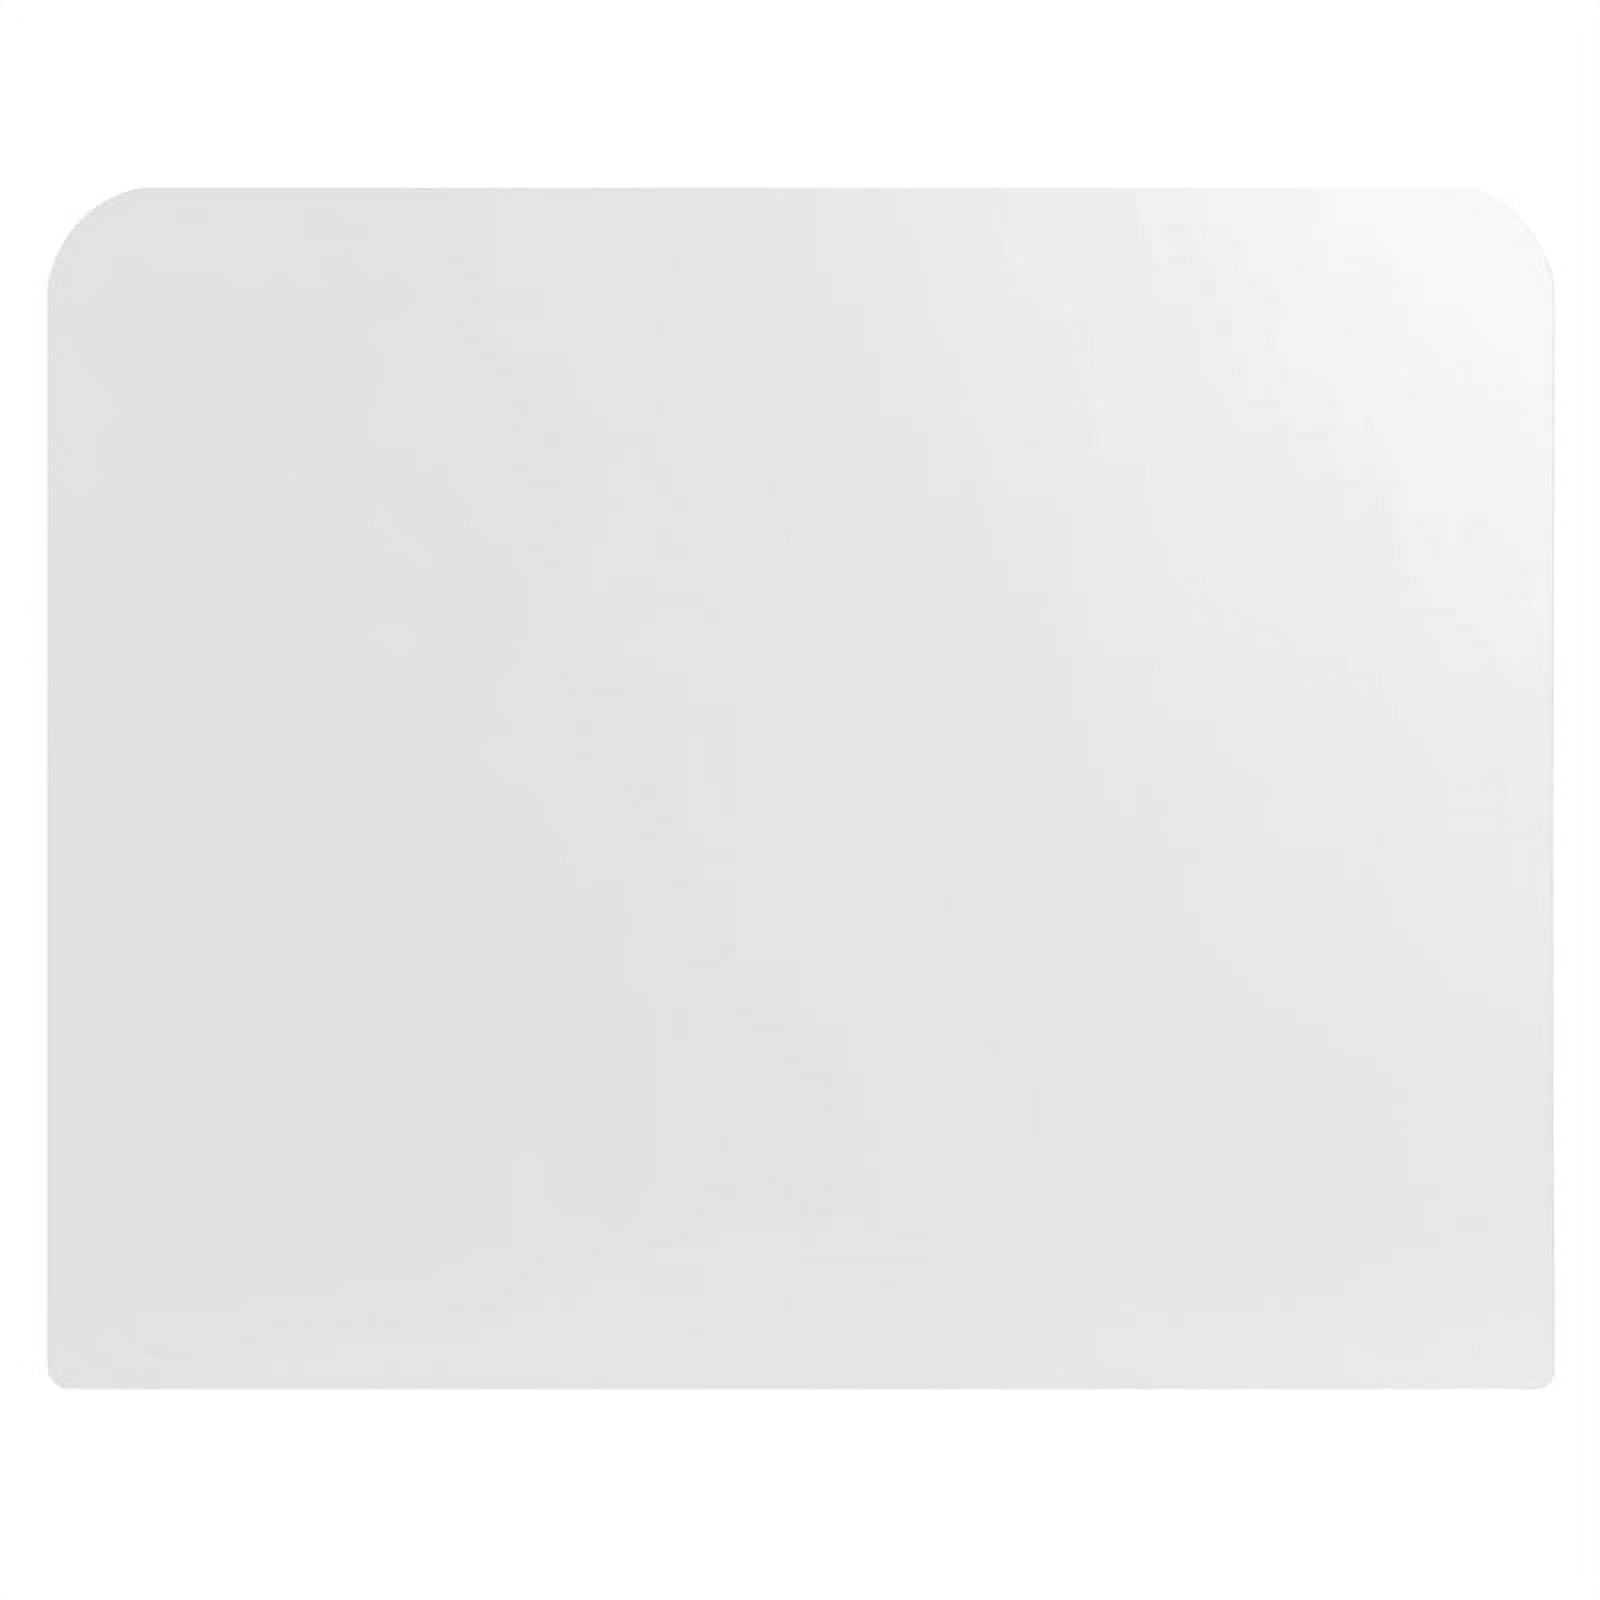 Picture of Boss NP04 30 x 24 x 0.24 in. Thick Plexiglass Panel